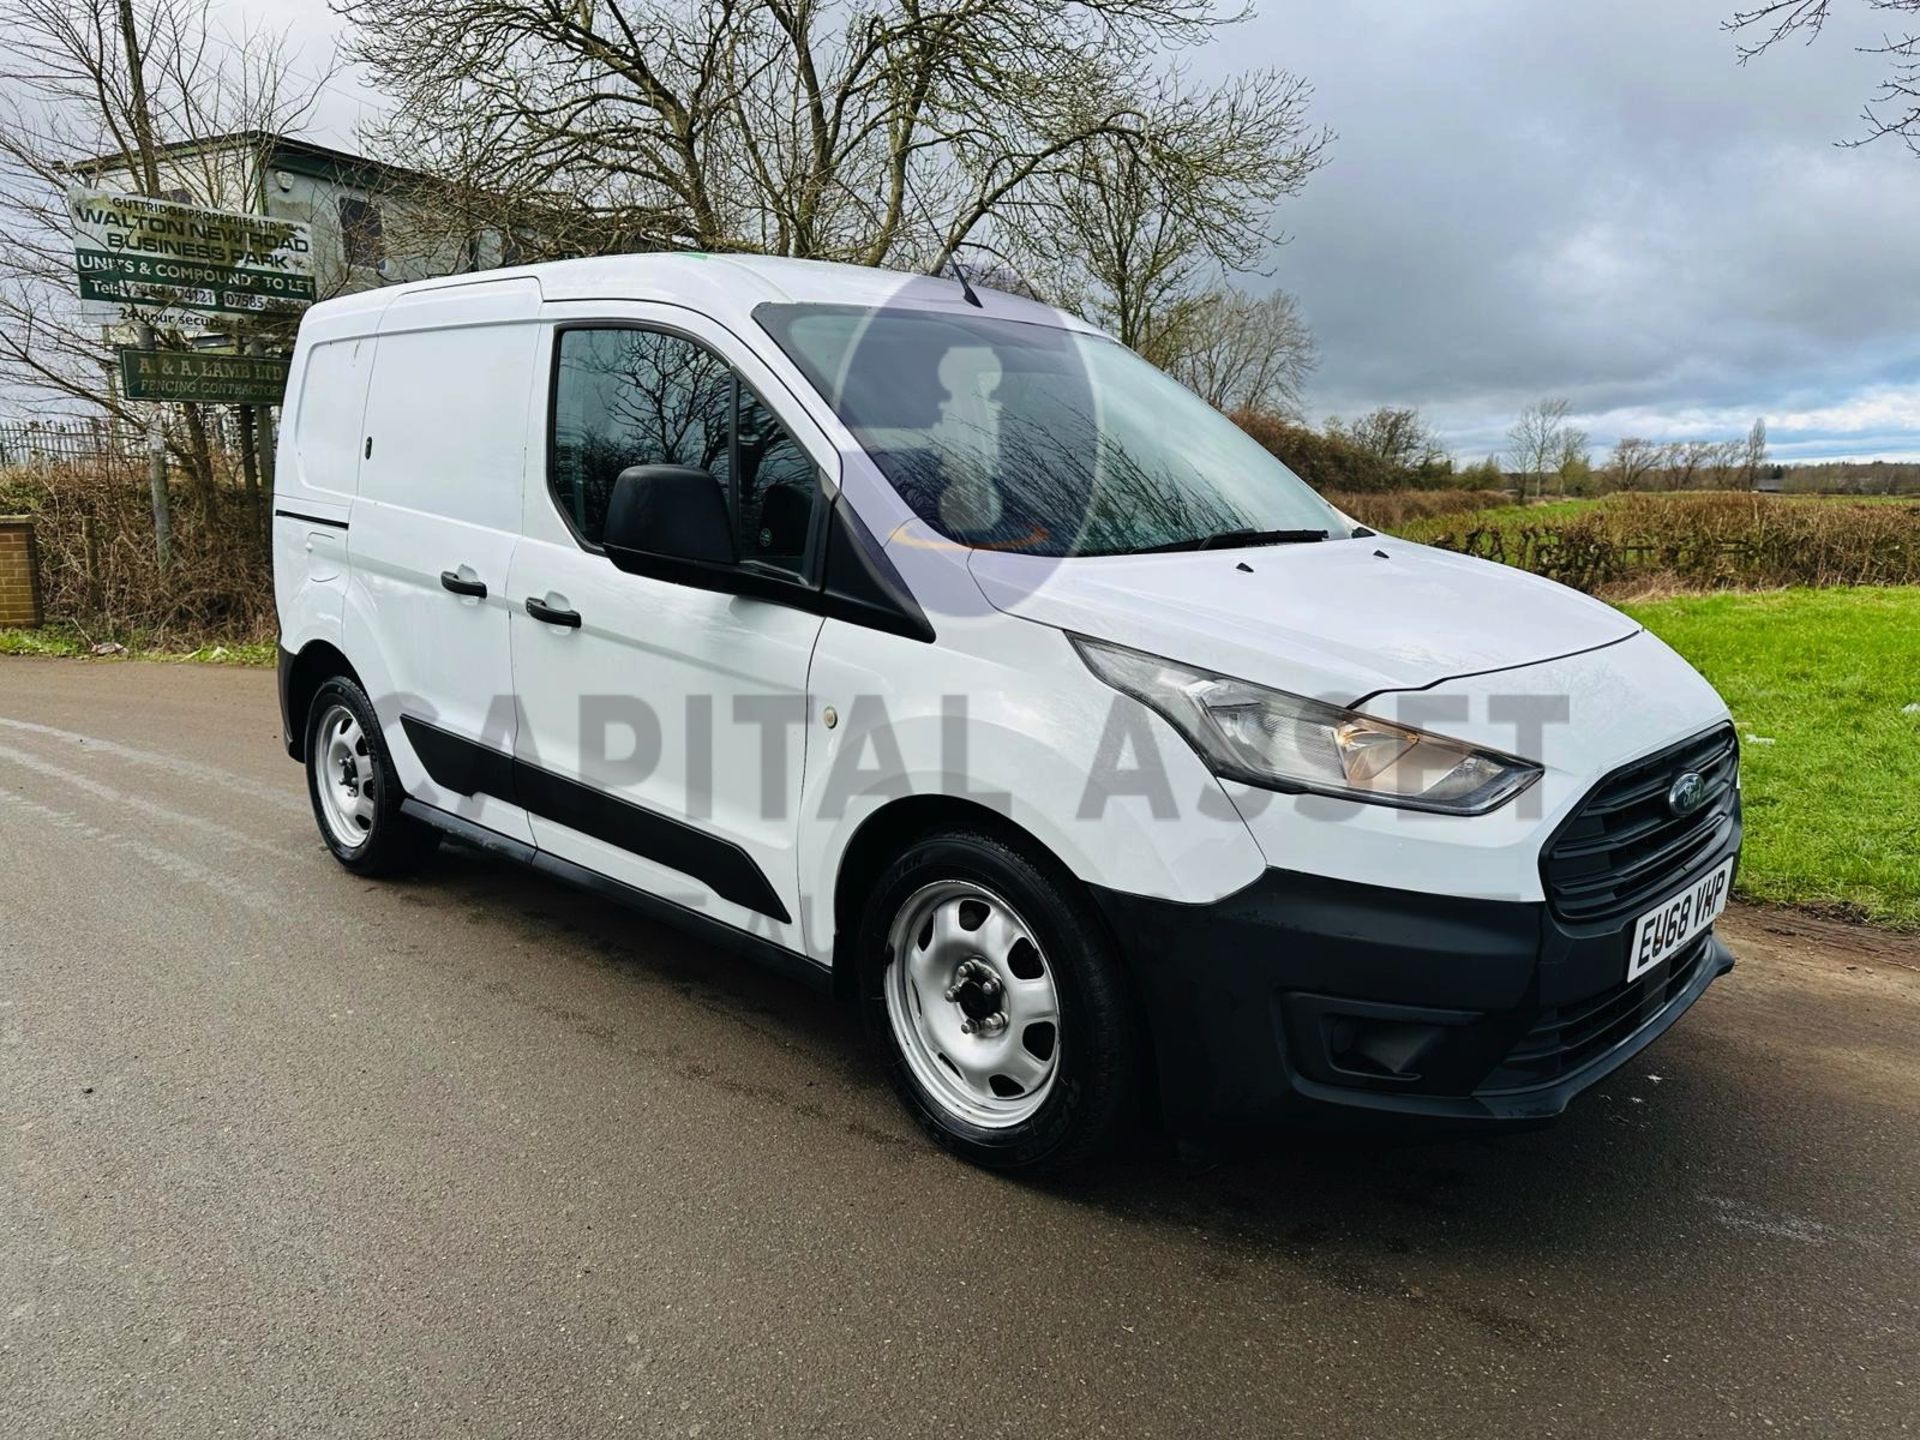 (ON SALE)FORD TRANSIT CONNECT 1.5TDI (100) 5 SEATER DUALINER / CREW VAN - EURO 6 - 2019 MODEL - - Image 2 of 25